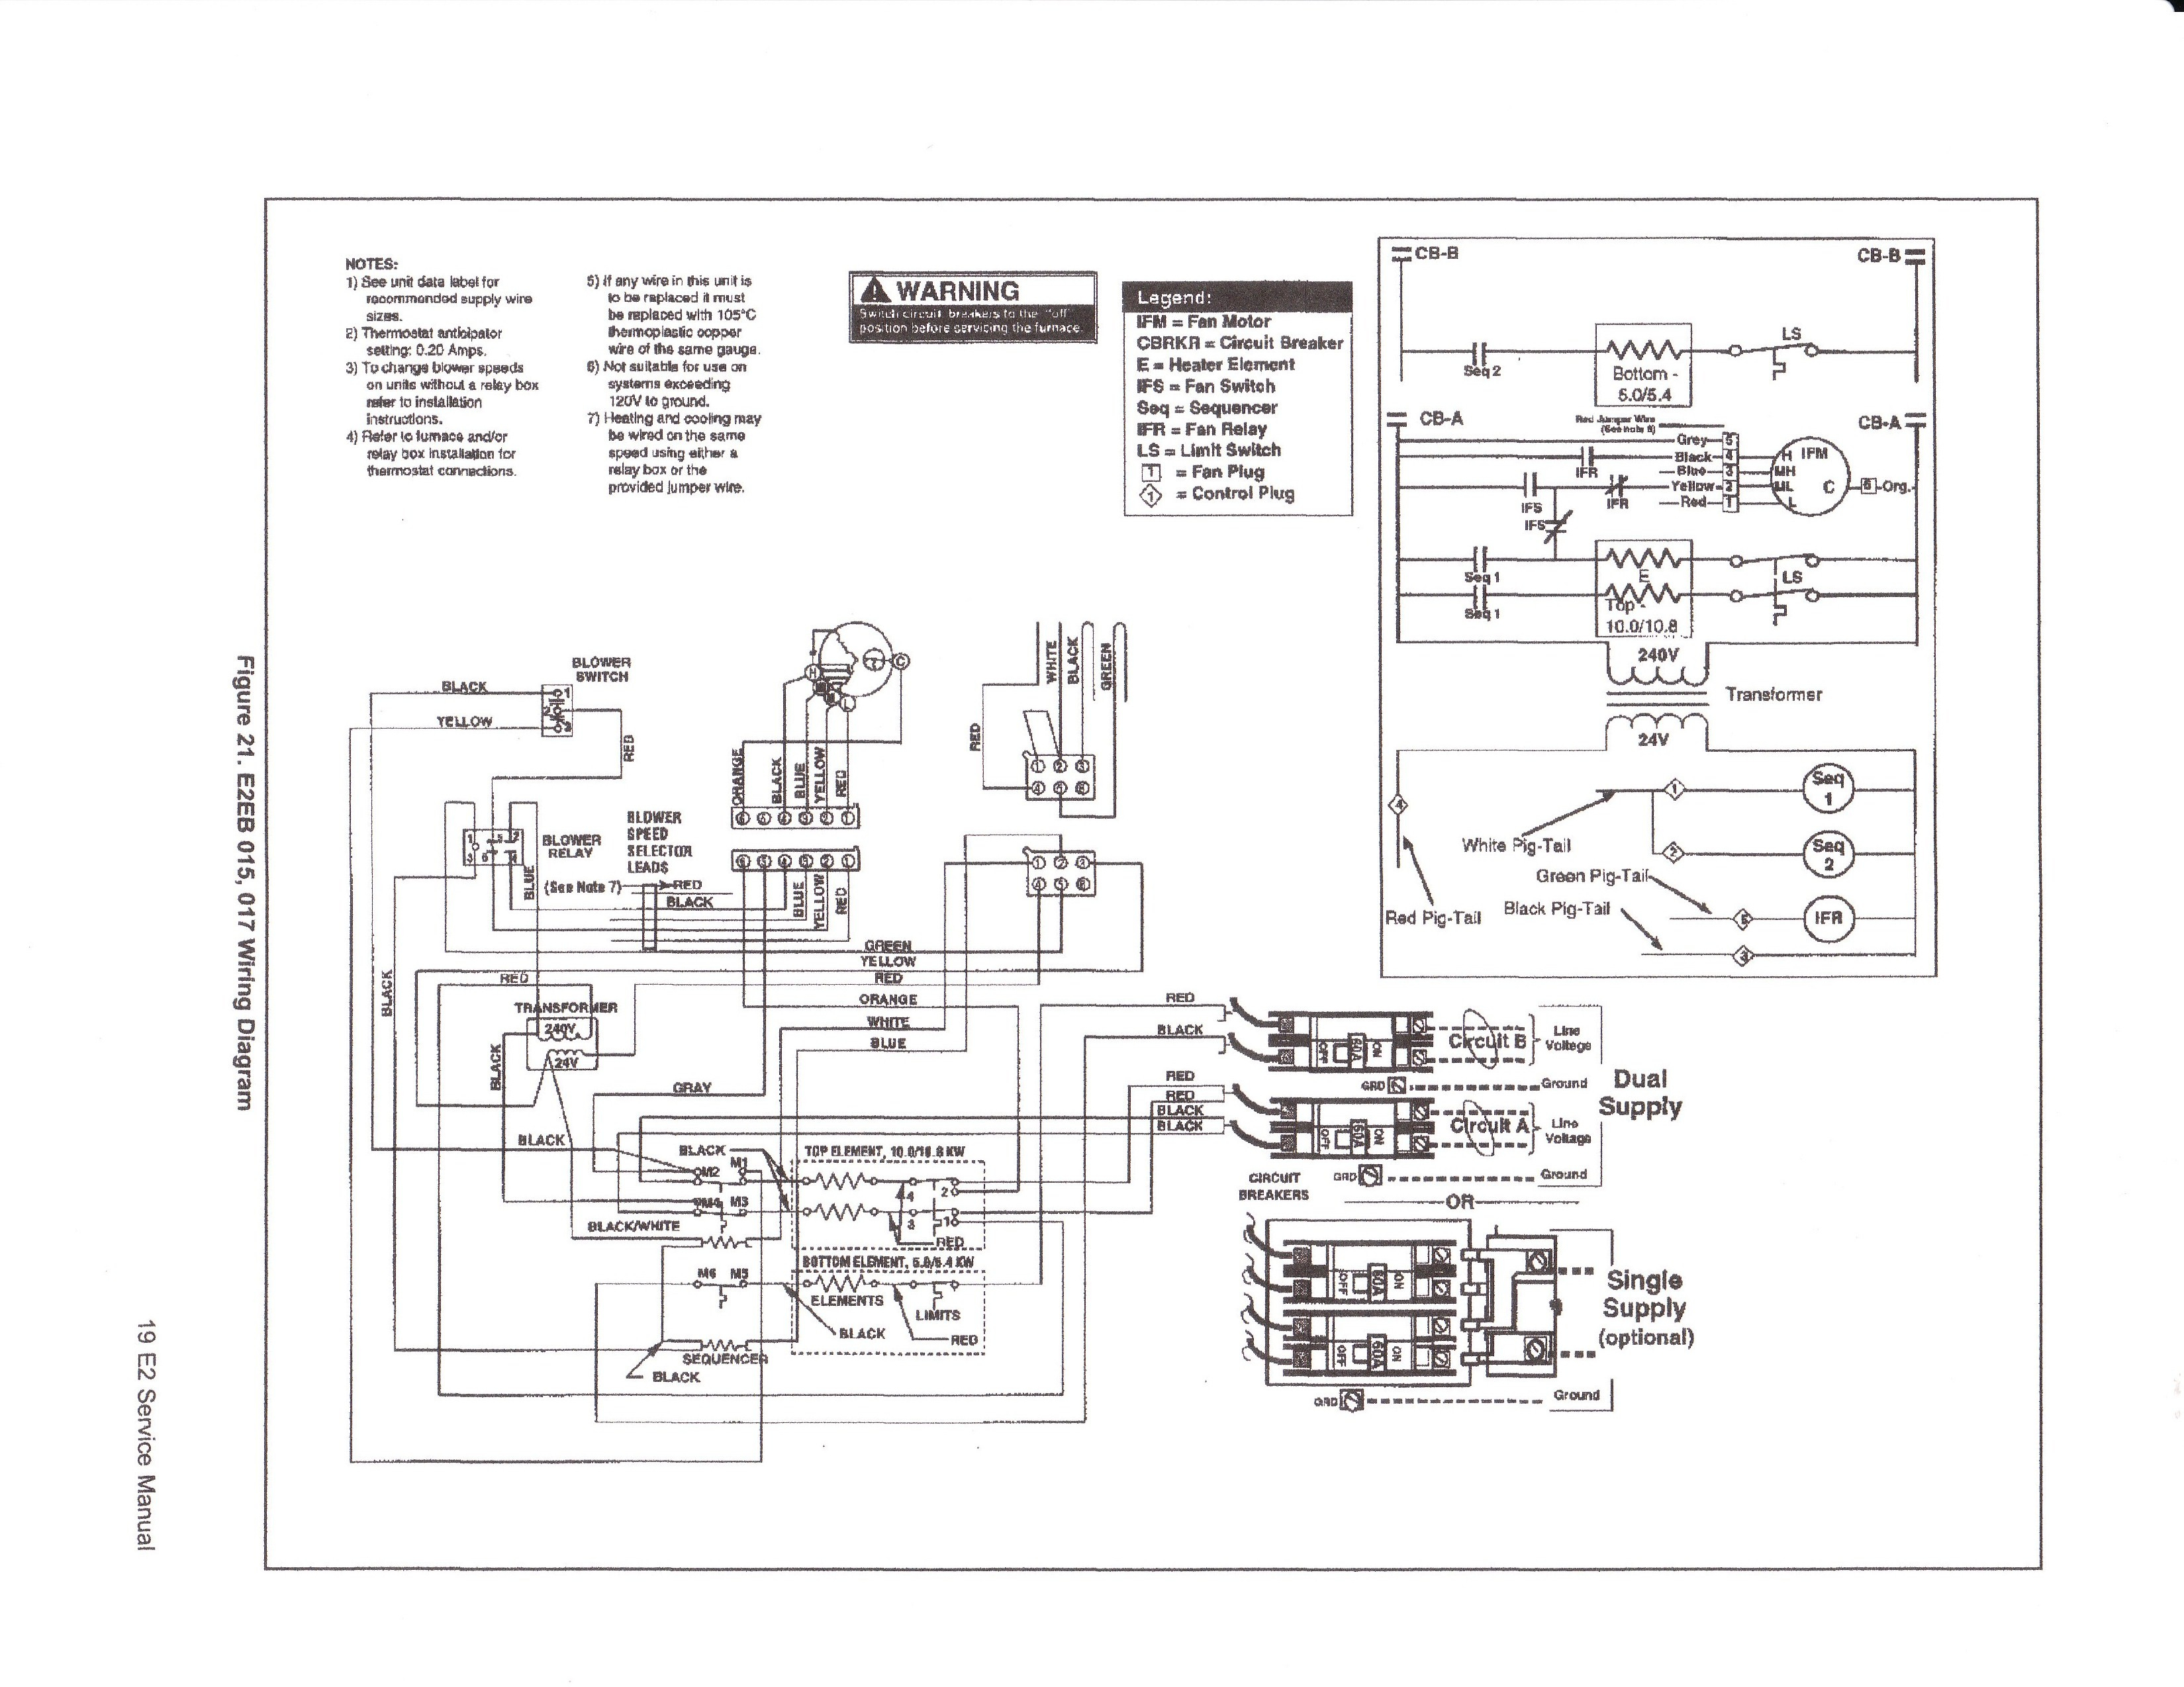 Home Furnace Wiring Diagram - All Wiring Diagram Data - Wiring Diagram For Mobile Home Furnace